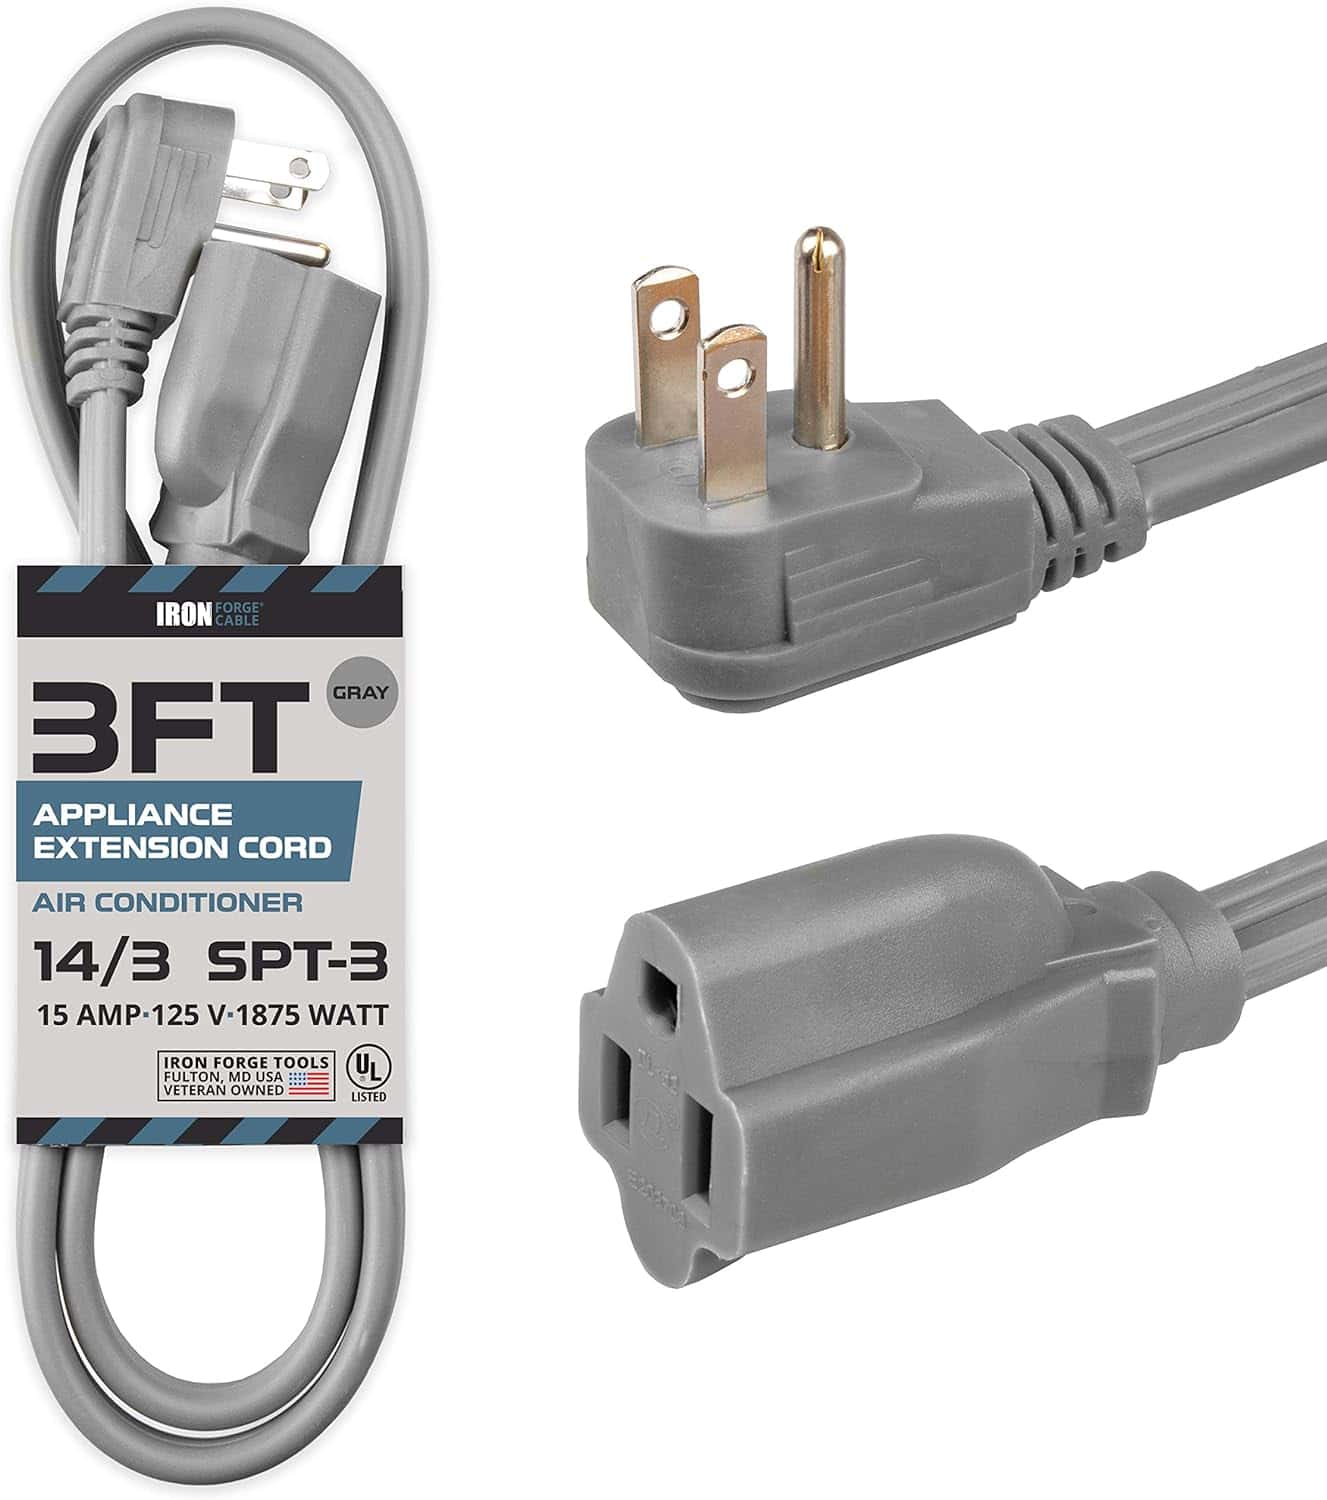 3-Ft-Appliance-Extension-Cord-Heavy-Duty-Gray-14-Gauge-3-Prong-SPT-3-Cable-for-Air-Conditioner-or-Refrigerator